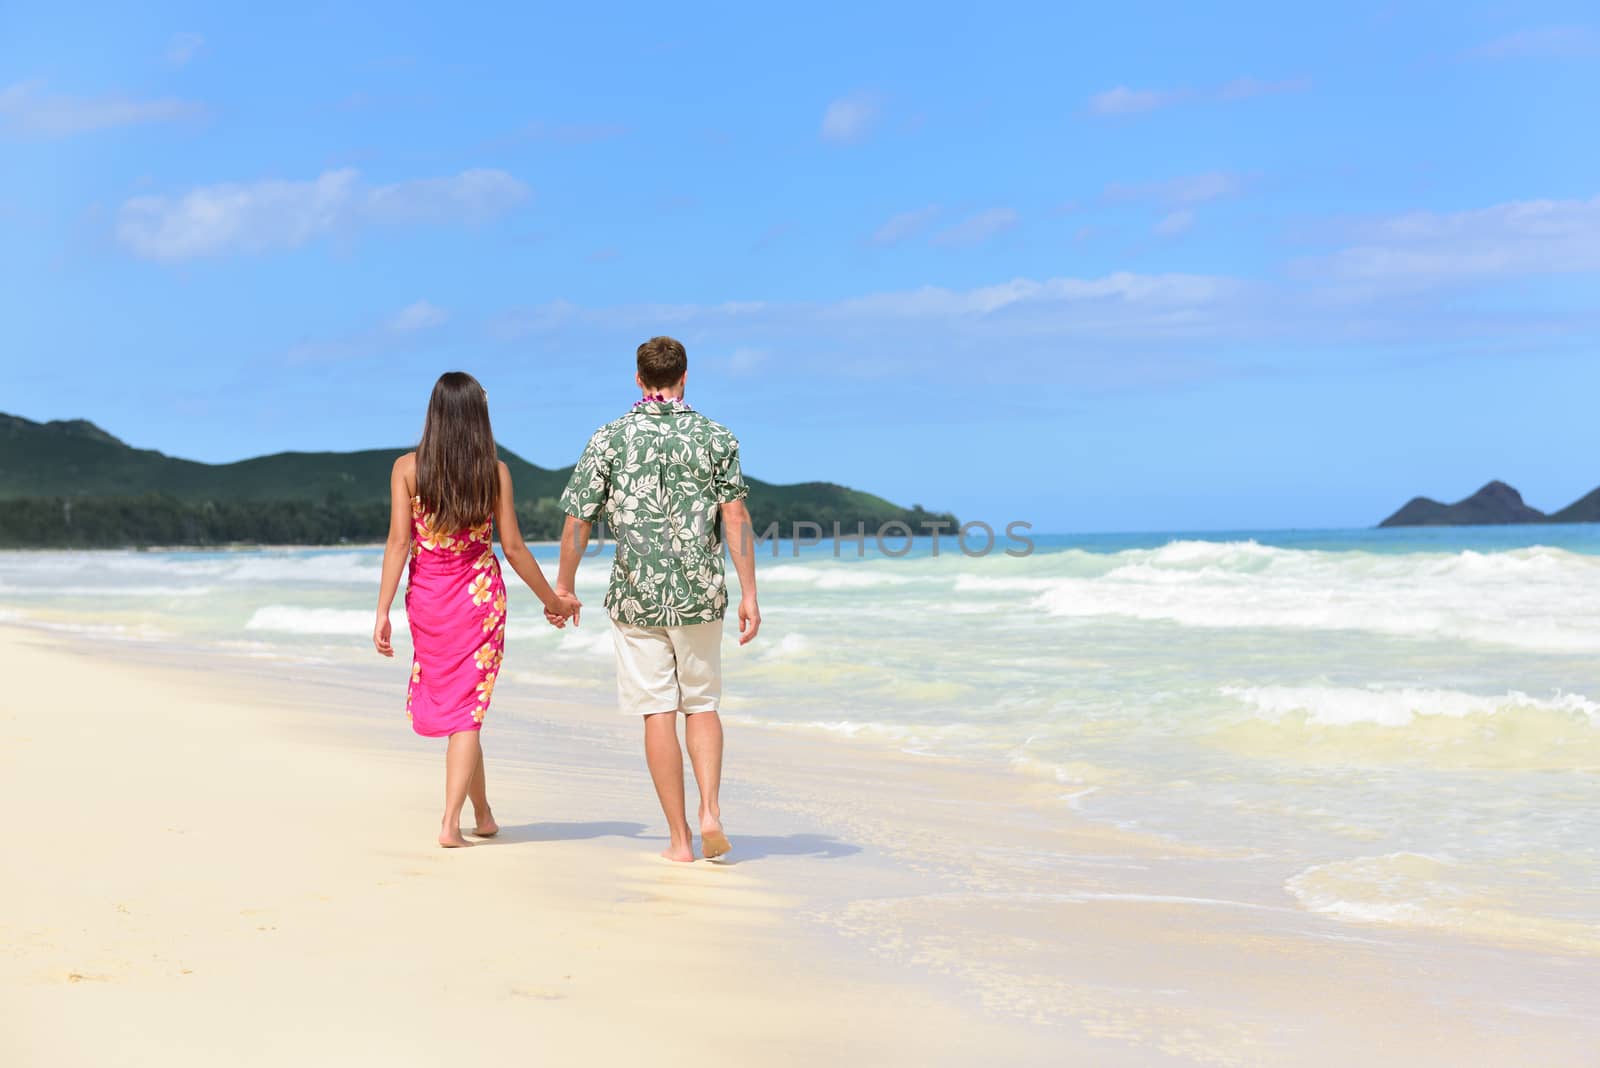 Hawaii honeymoon couple of newlyweds walking on tropical beach in Hawaiian apparel, pink sarong dress and green Aloha shirt for Polynesian cultural tradition. Young people holding hands happy in love.